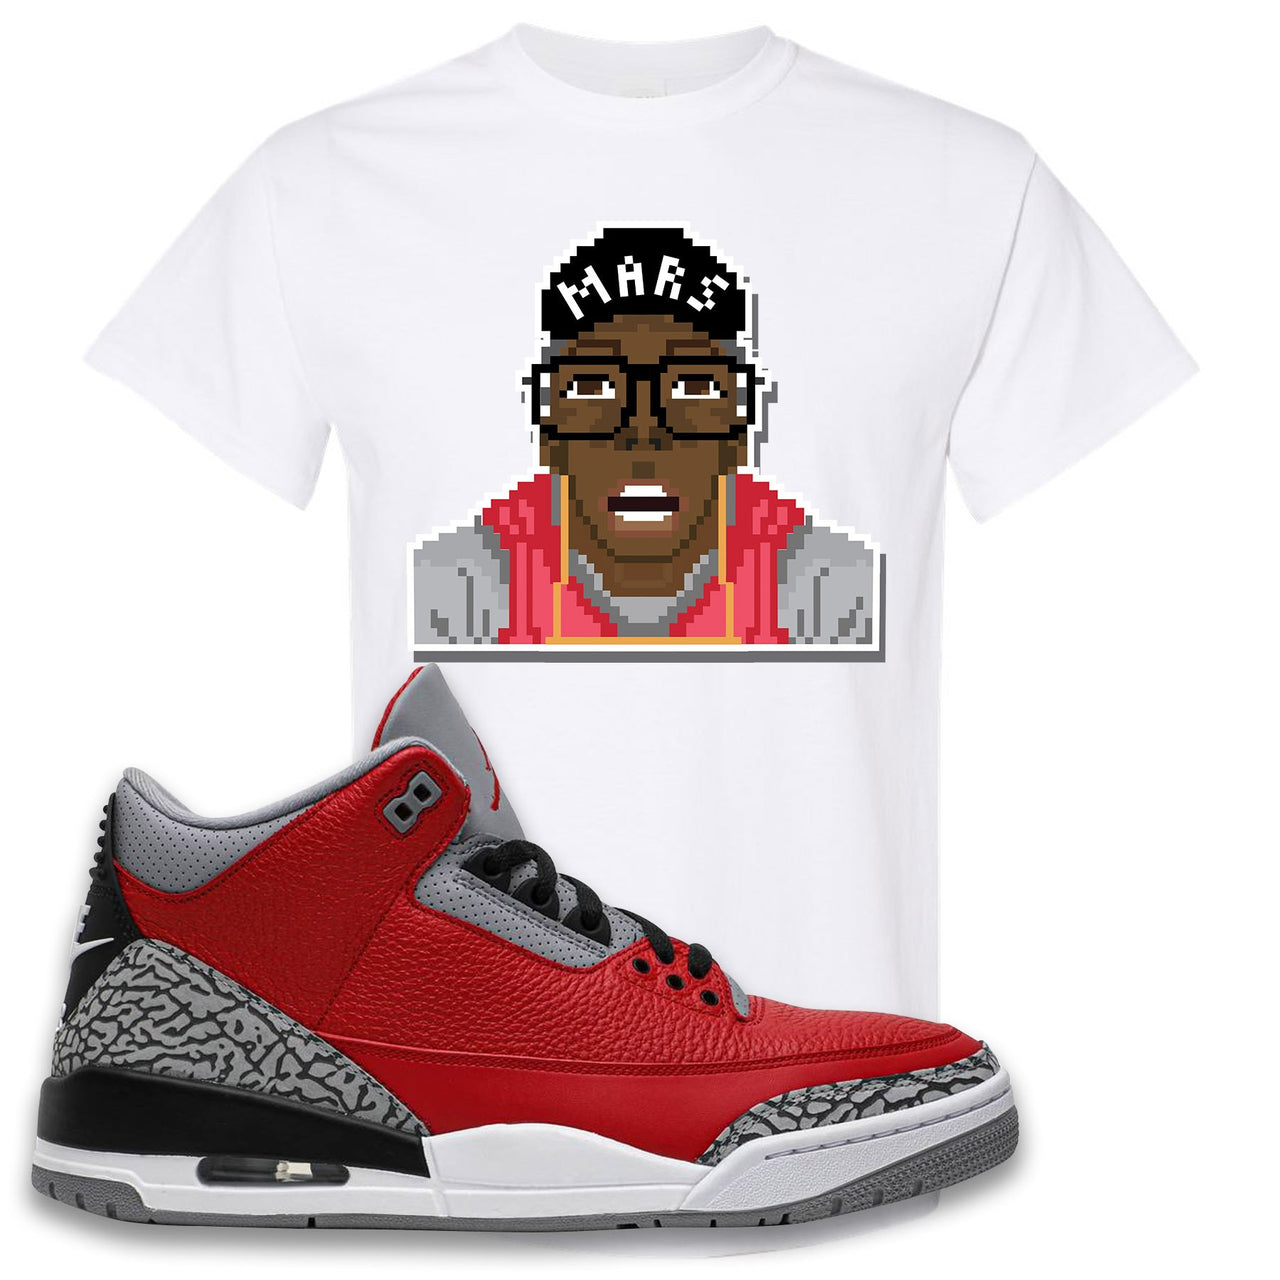 Jordan 3 Red Cement Chicago All-Star Sneaker White T Shirt | Tees to match Jordan 3 All Star Red Cement Shoes | Mars Pixel